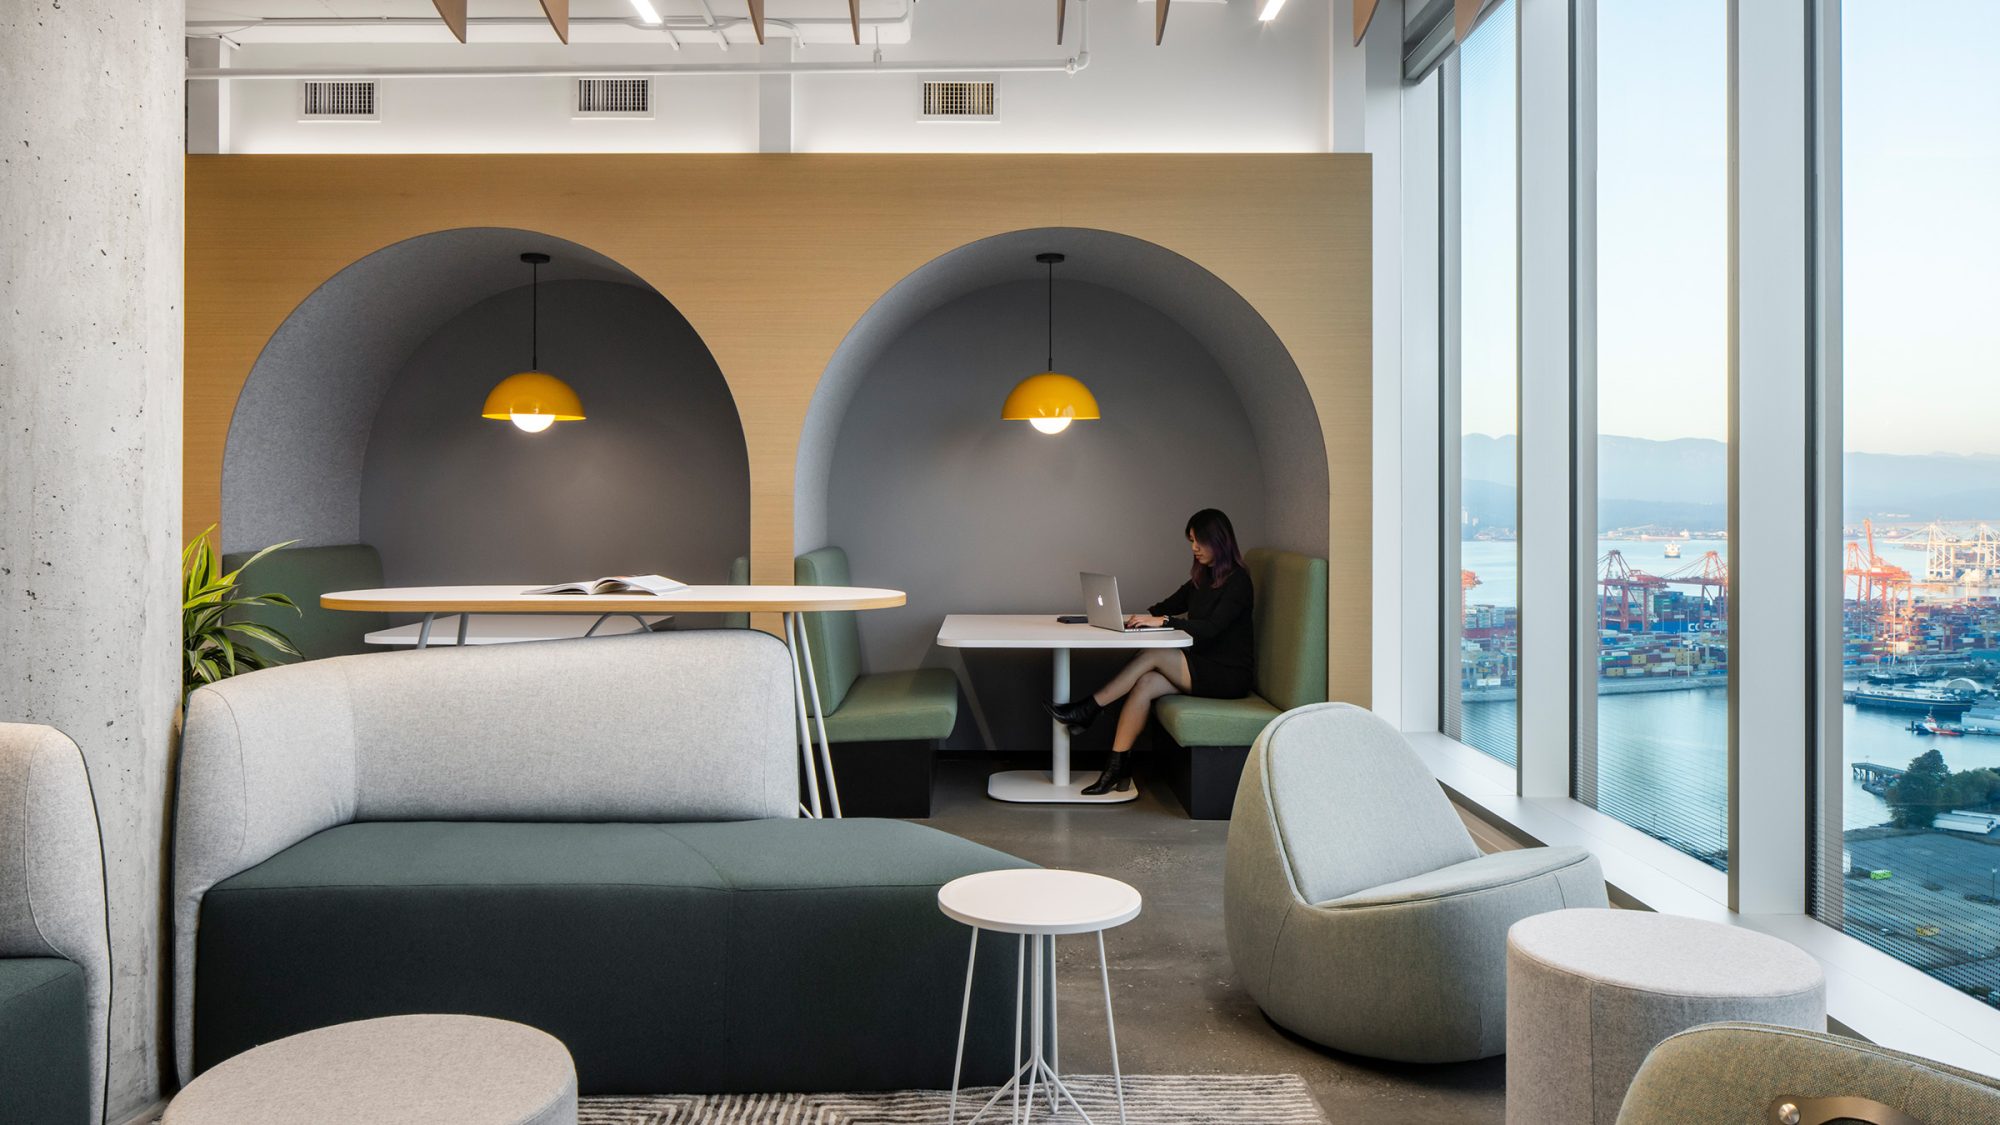 M Moser’s office design in Vancouver supports the employee experience in a post-pandemic workplace.